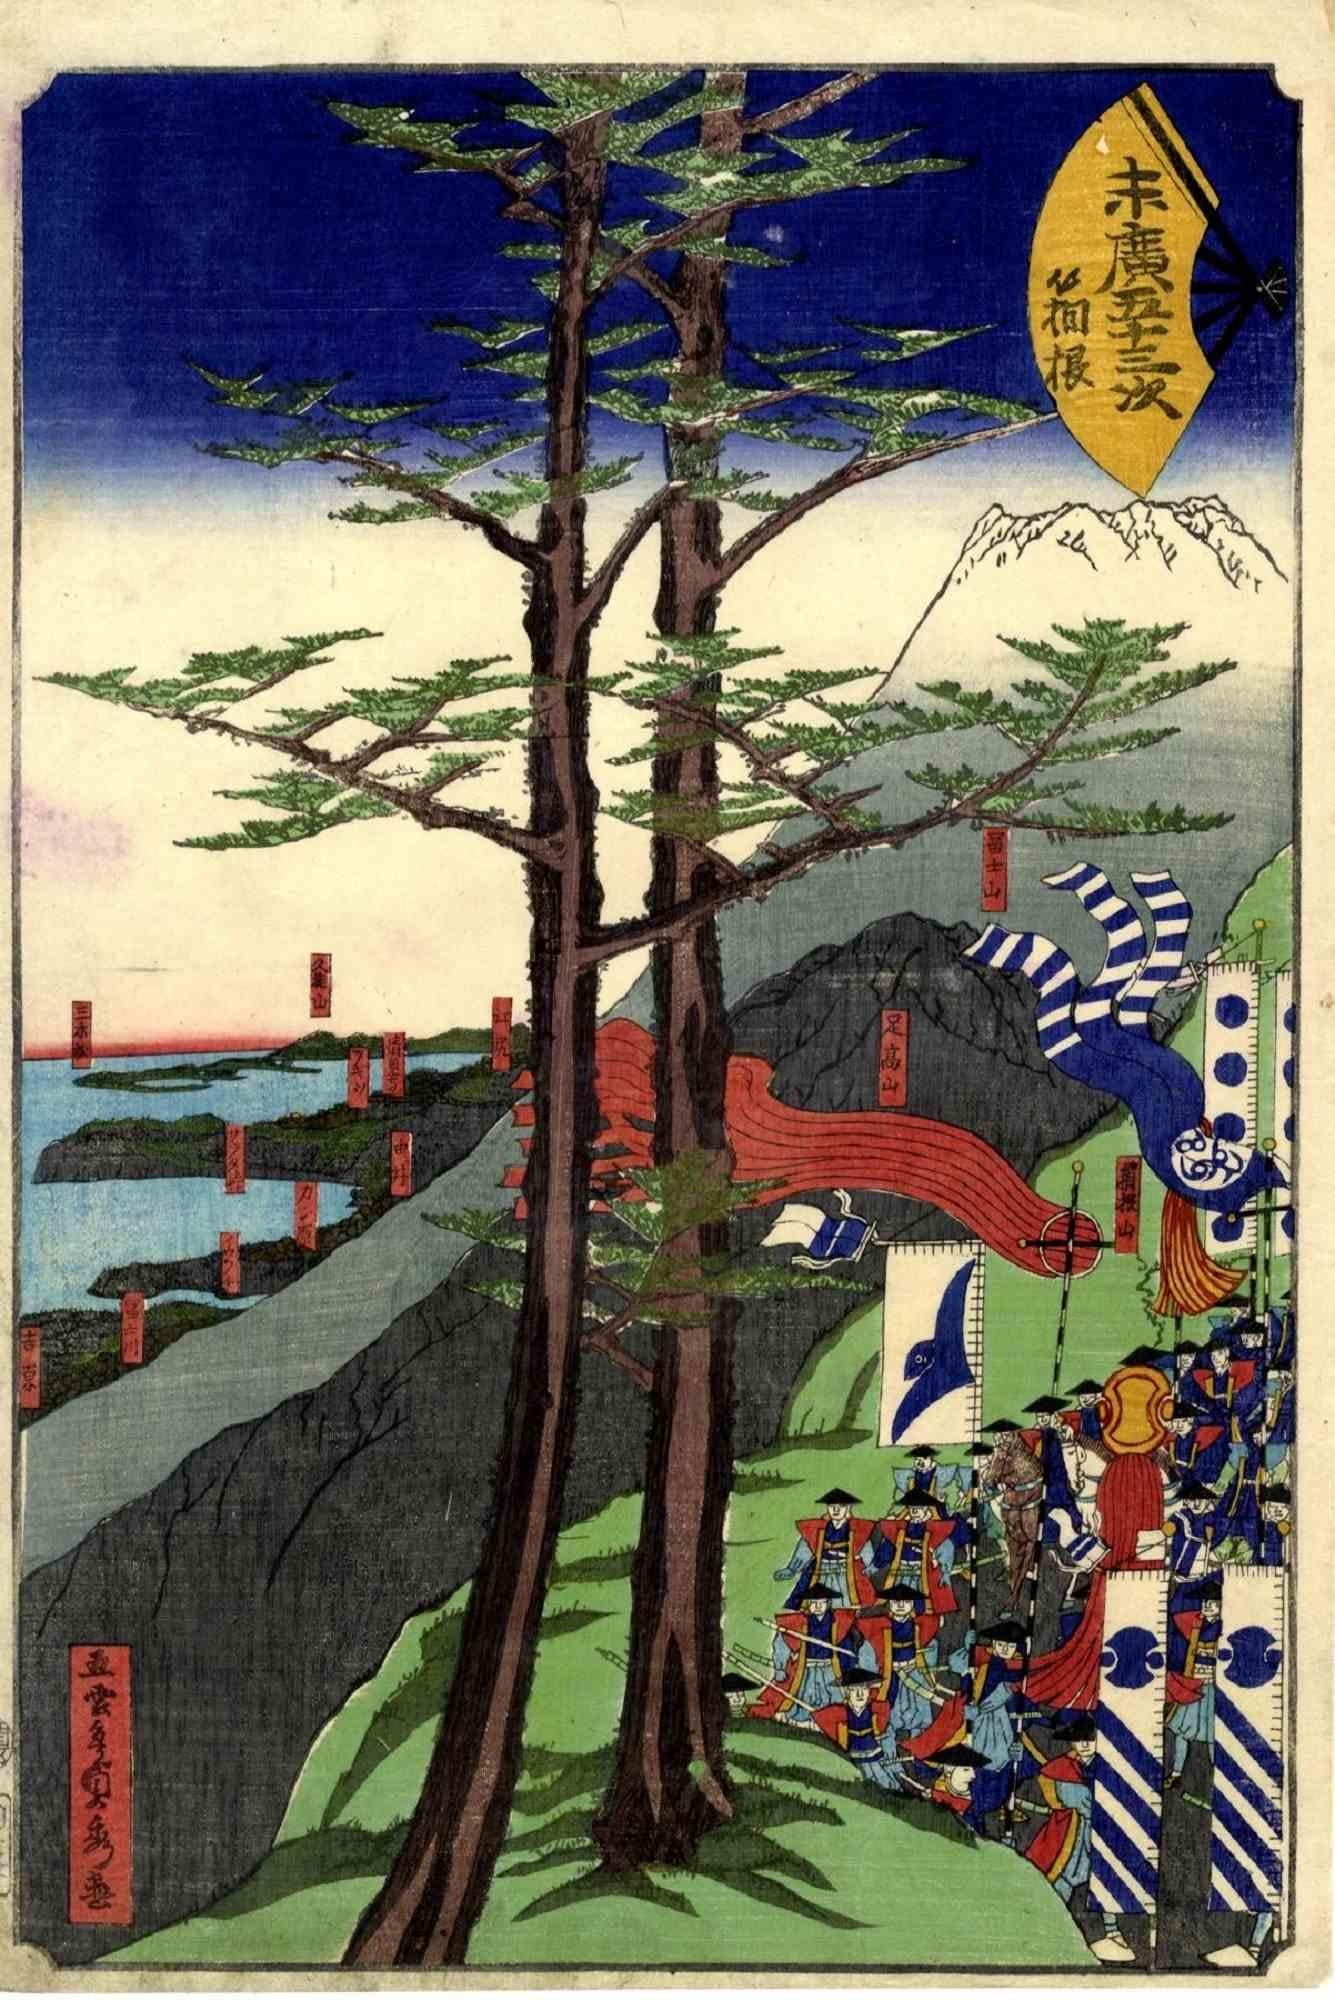 Meishoe is an artwork realized in the 1865 by Utagawa Sadahide (1807 – c. 1878–1879).

Woodcut Print Oban Format.

From the series "Suehiro gojusan tsugi" (A fan with the 53 stations). A daimyo procession arrives in Hakone, Fuji on the